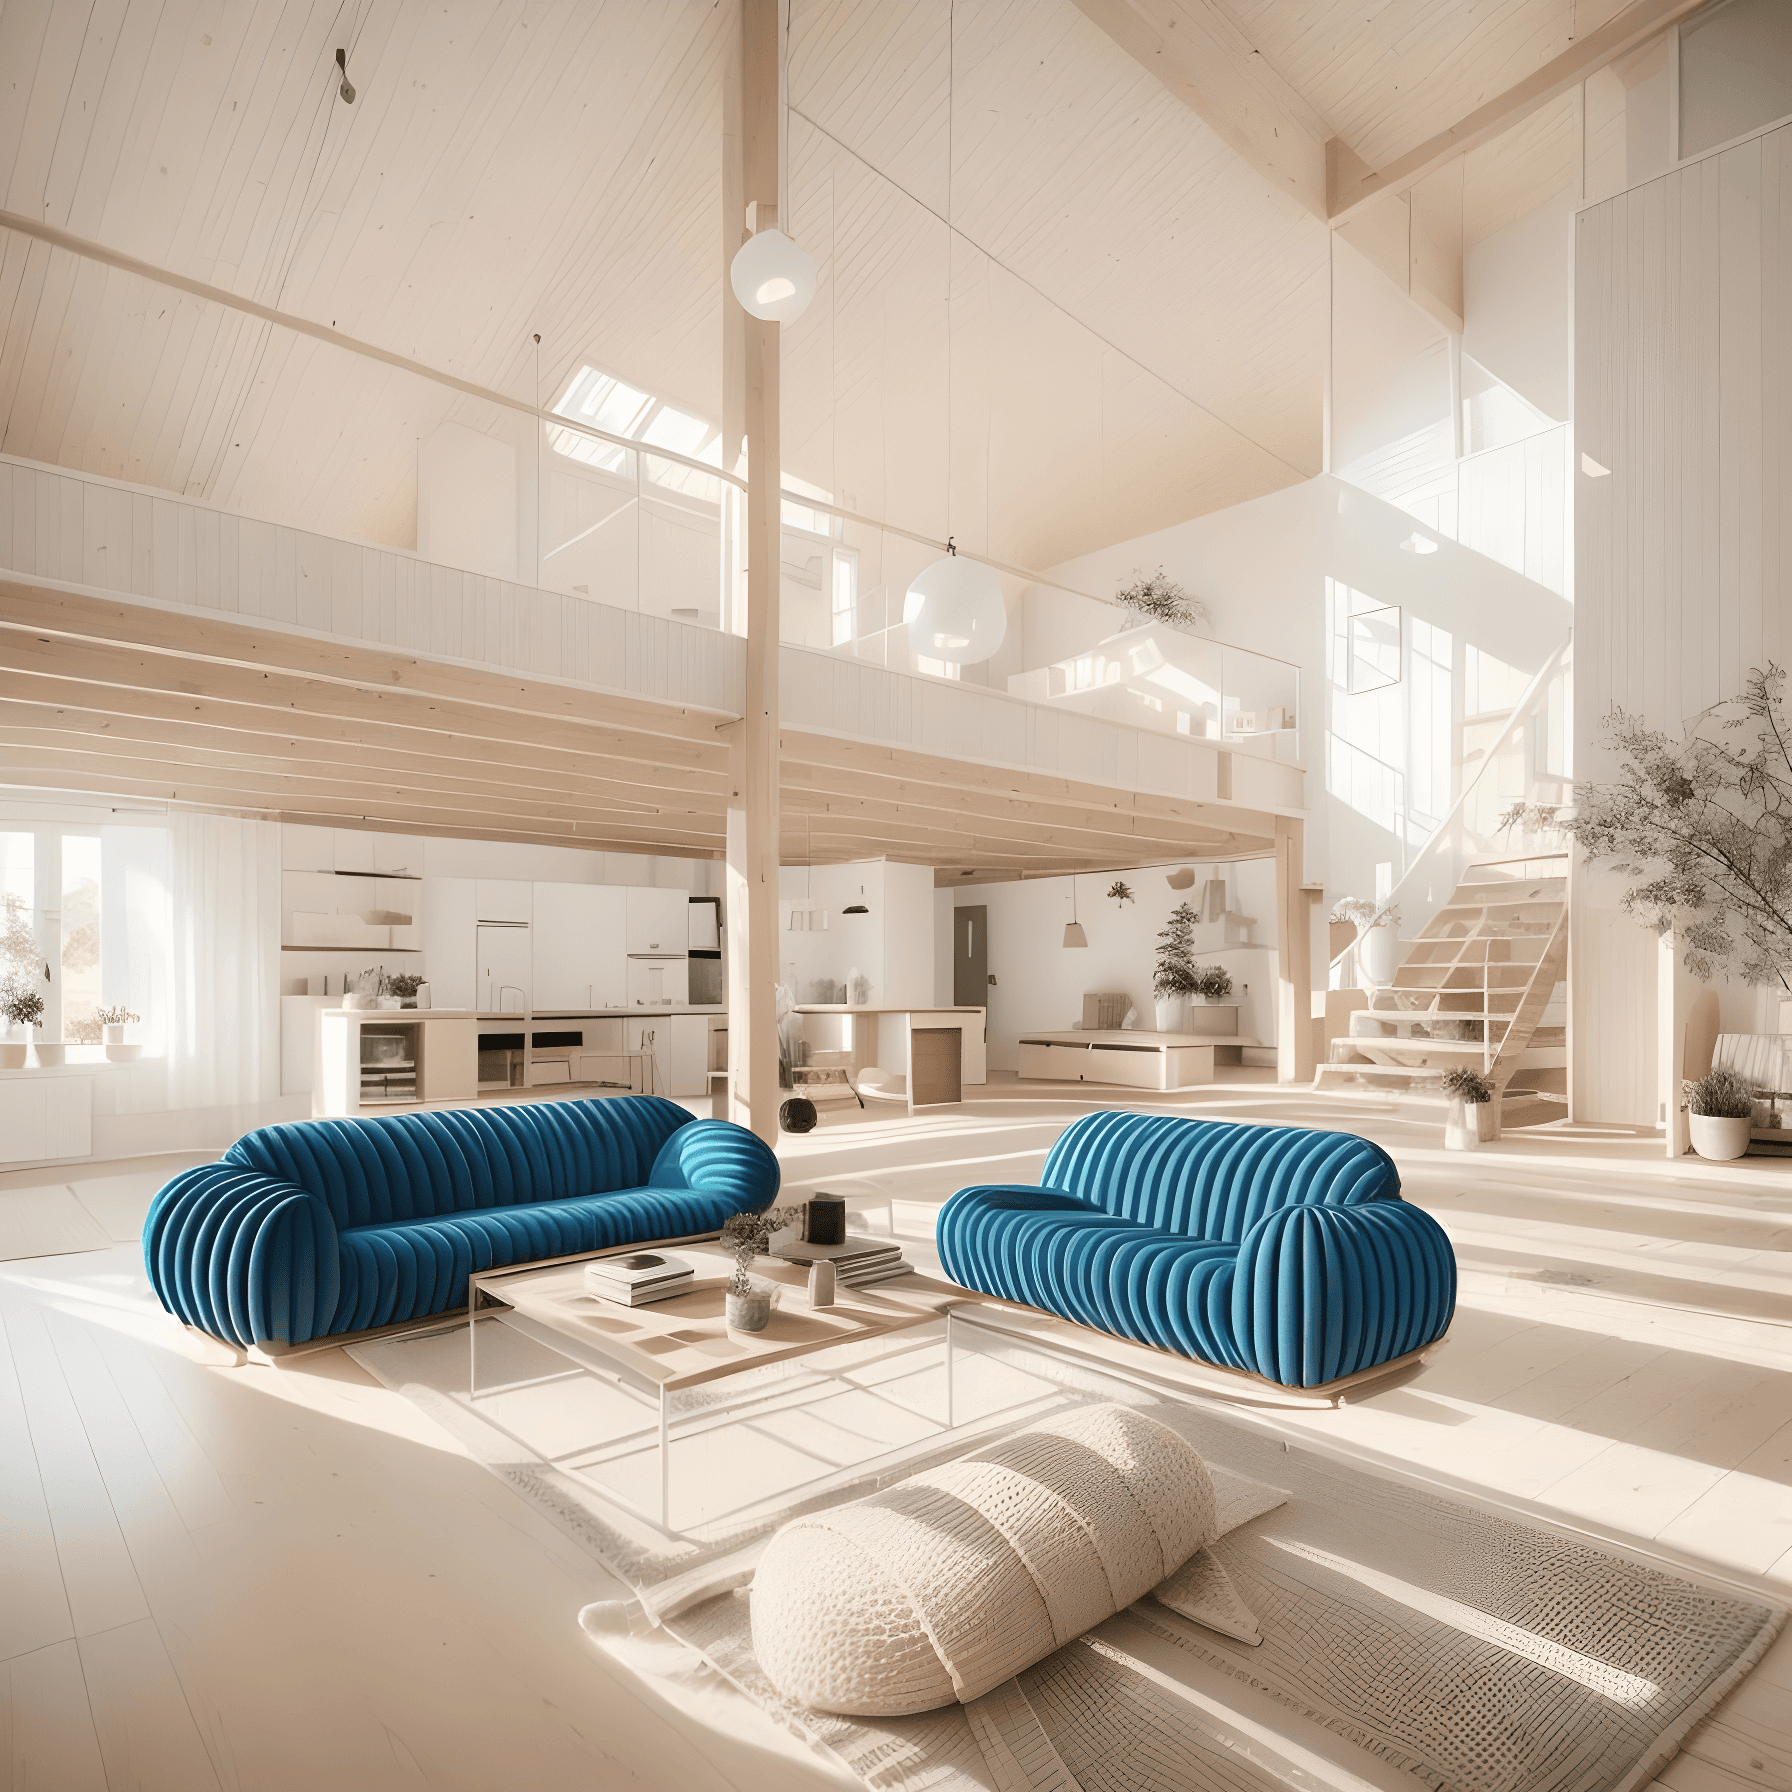 Davinte | AI Platform for Architects and Interior Designers - AI POWERED Rendering ENGINE